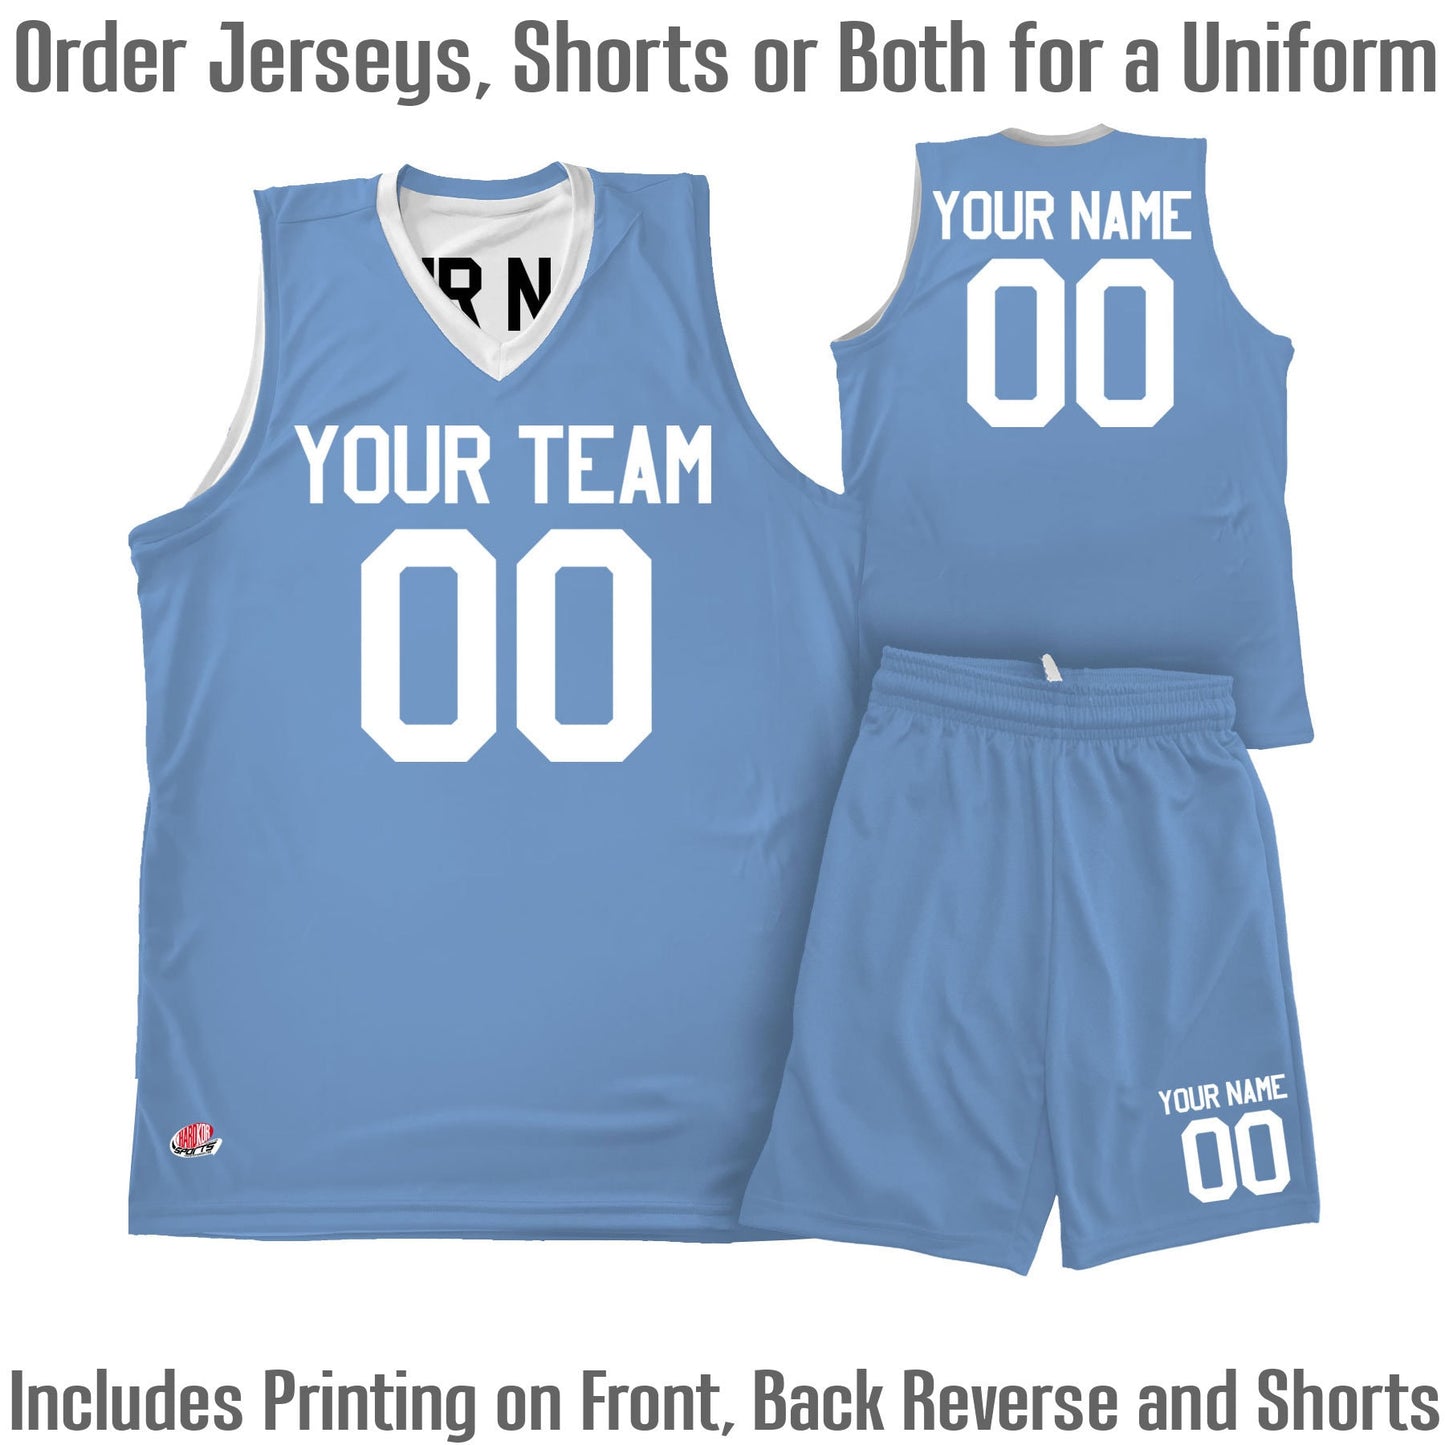 Custom Reversible Basketball Uniform | Unique Colors | Smooth Knit Lightweight V-neck Jersey | Add Shorts |  Team Player Name, Numbers